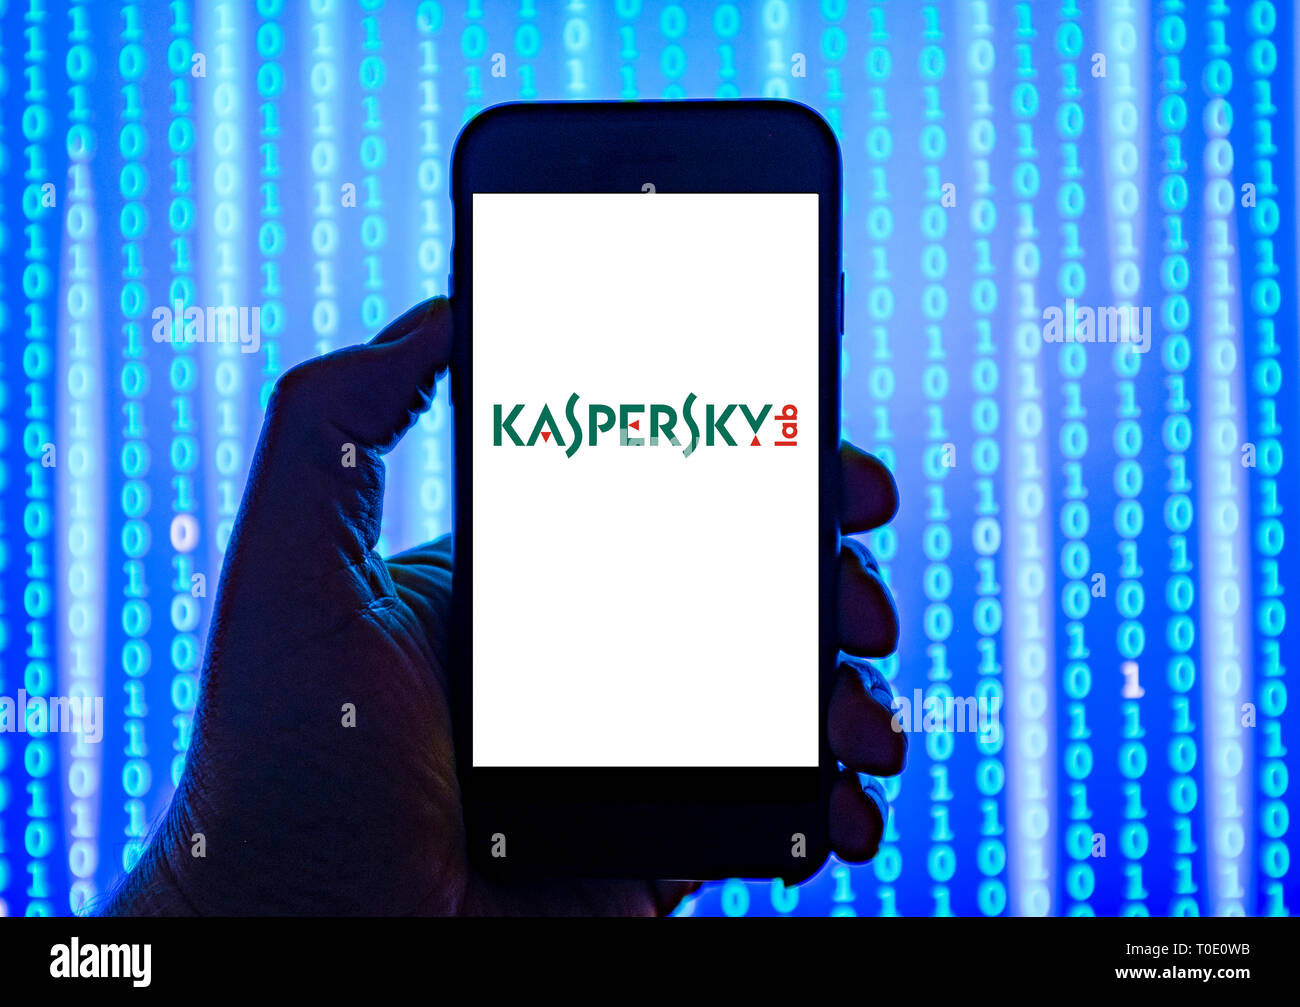 Person holding smart phone with Kaspersky anti-virus software company logo displayed on the screen. Stock Photo